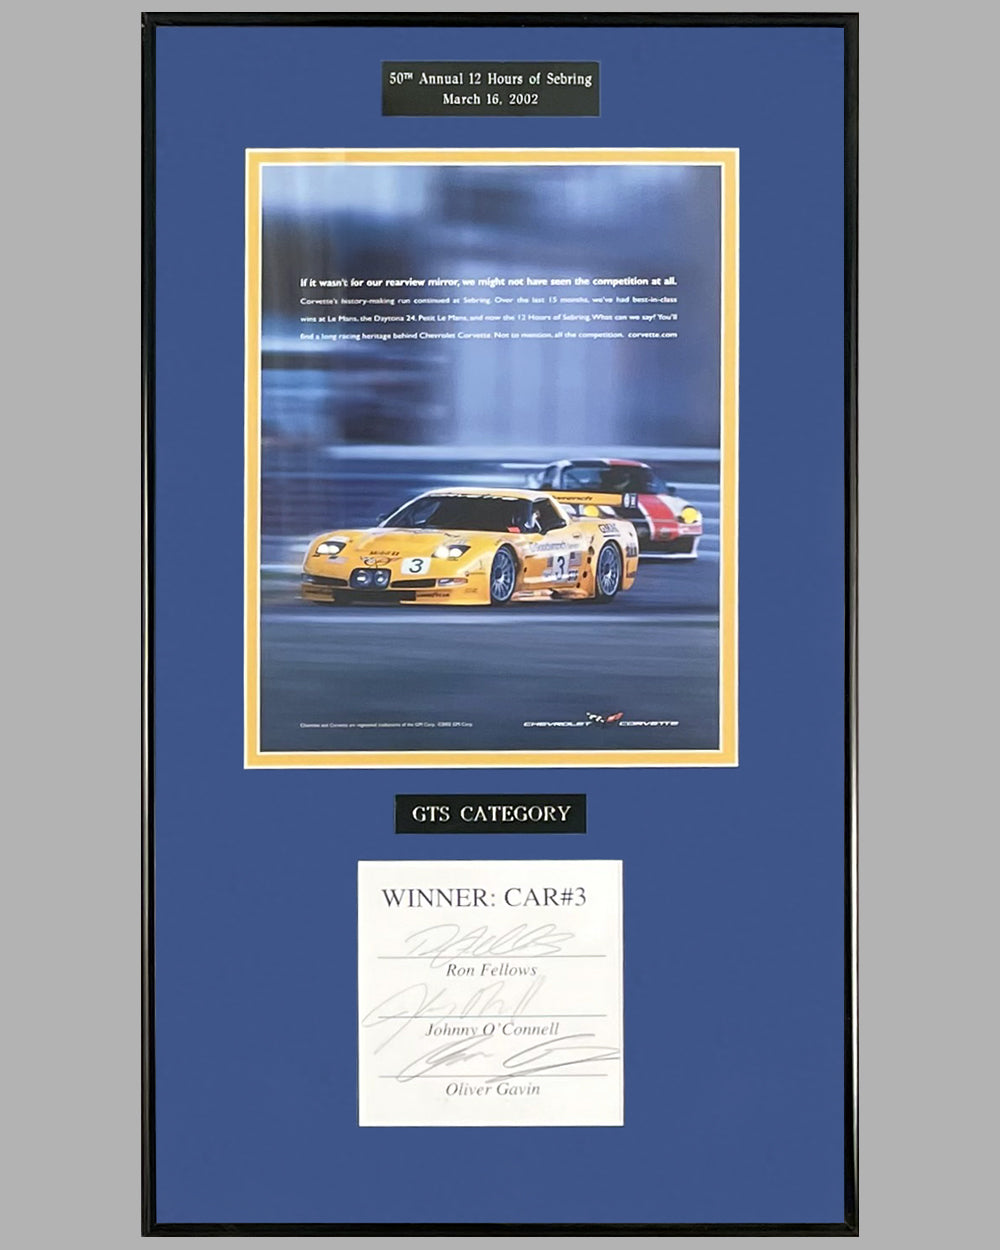 50th 12 Hours of Sebring 2002 original G.M. ad copy proof, autographed by the 3 drivers